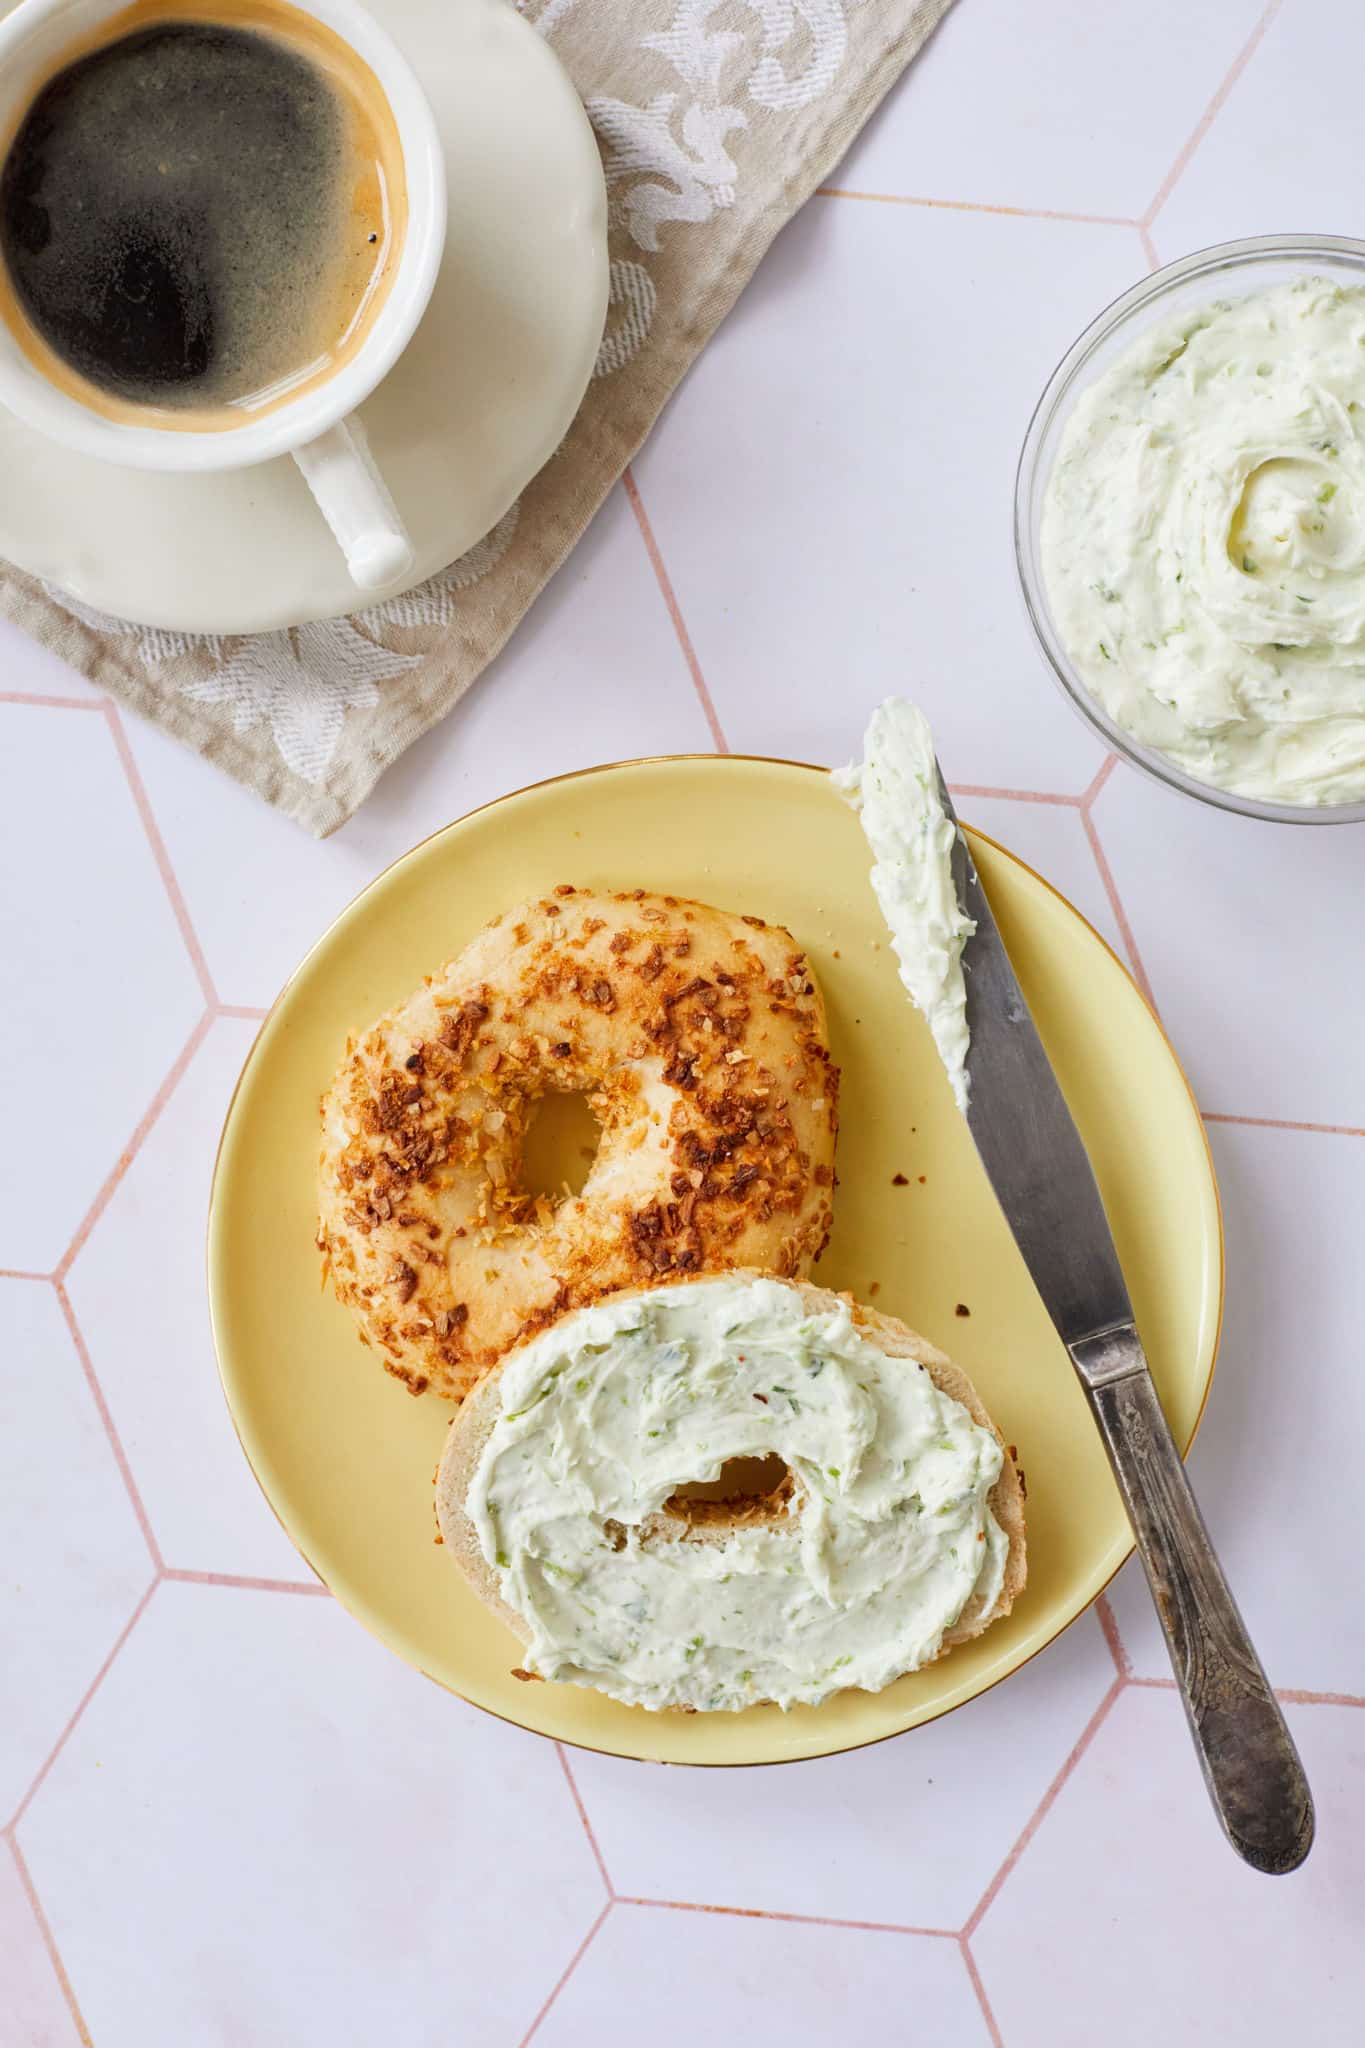 Garlic and Chive Flavored Cream Cheese is spread on a garlic bagel, served on a yellow plate, along with a cup of espresso coffee.